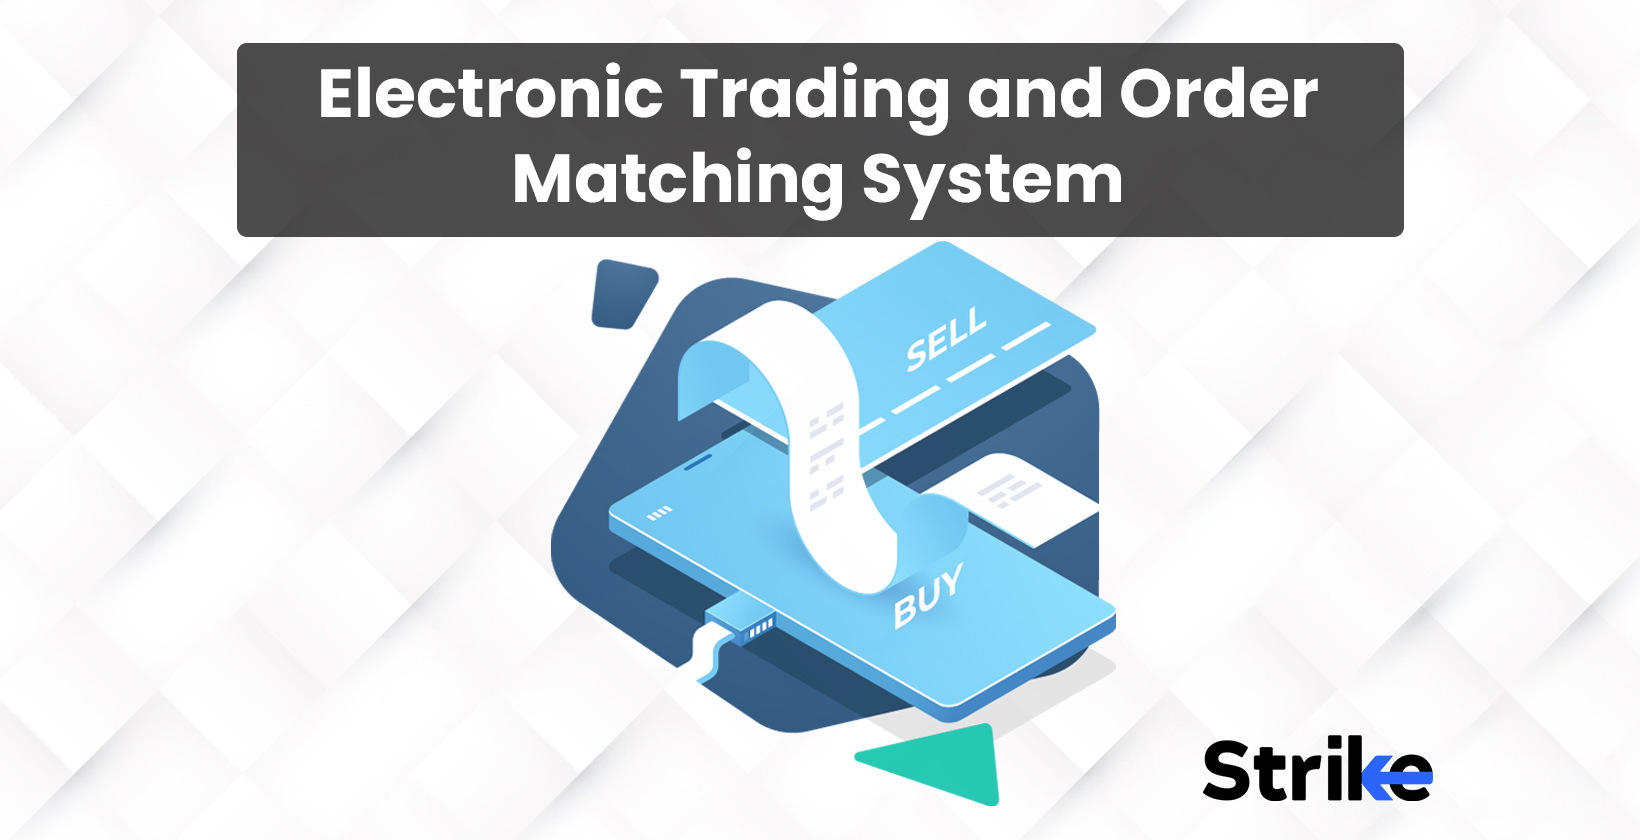 Electronic Trading and Order Matching System Basics